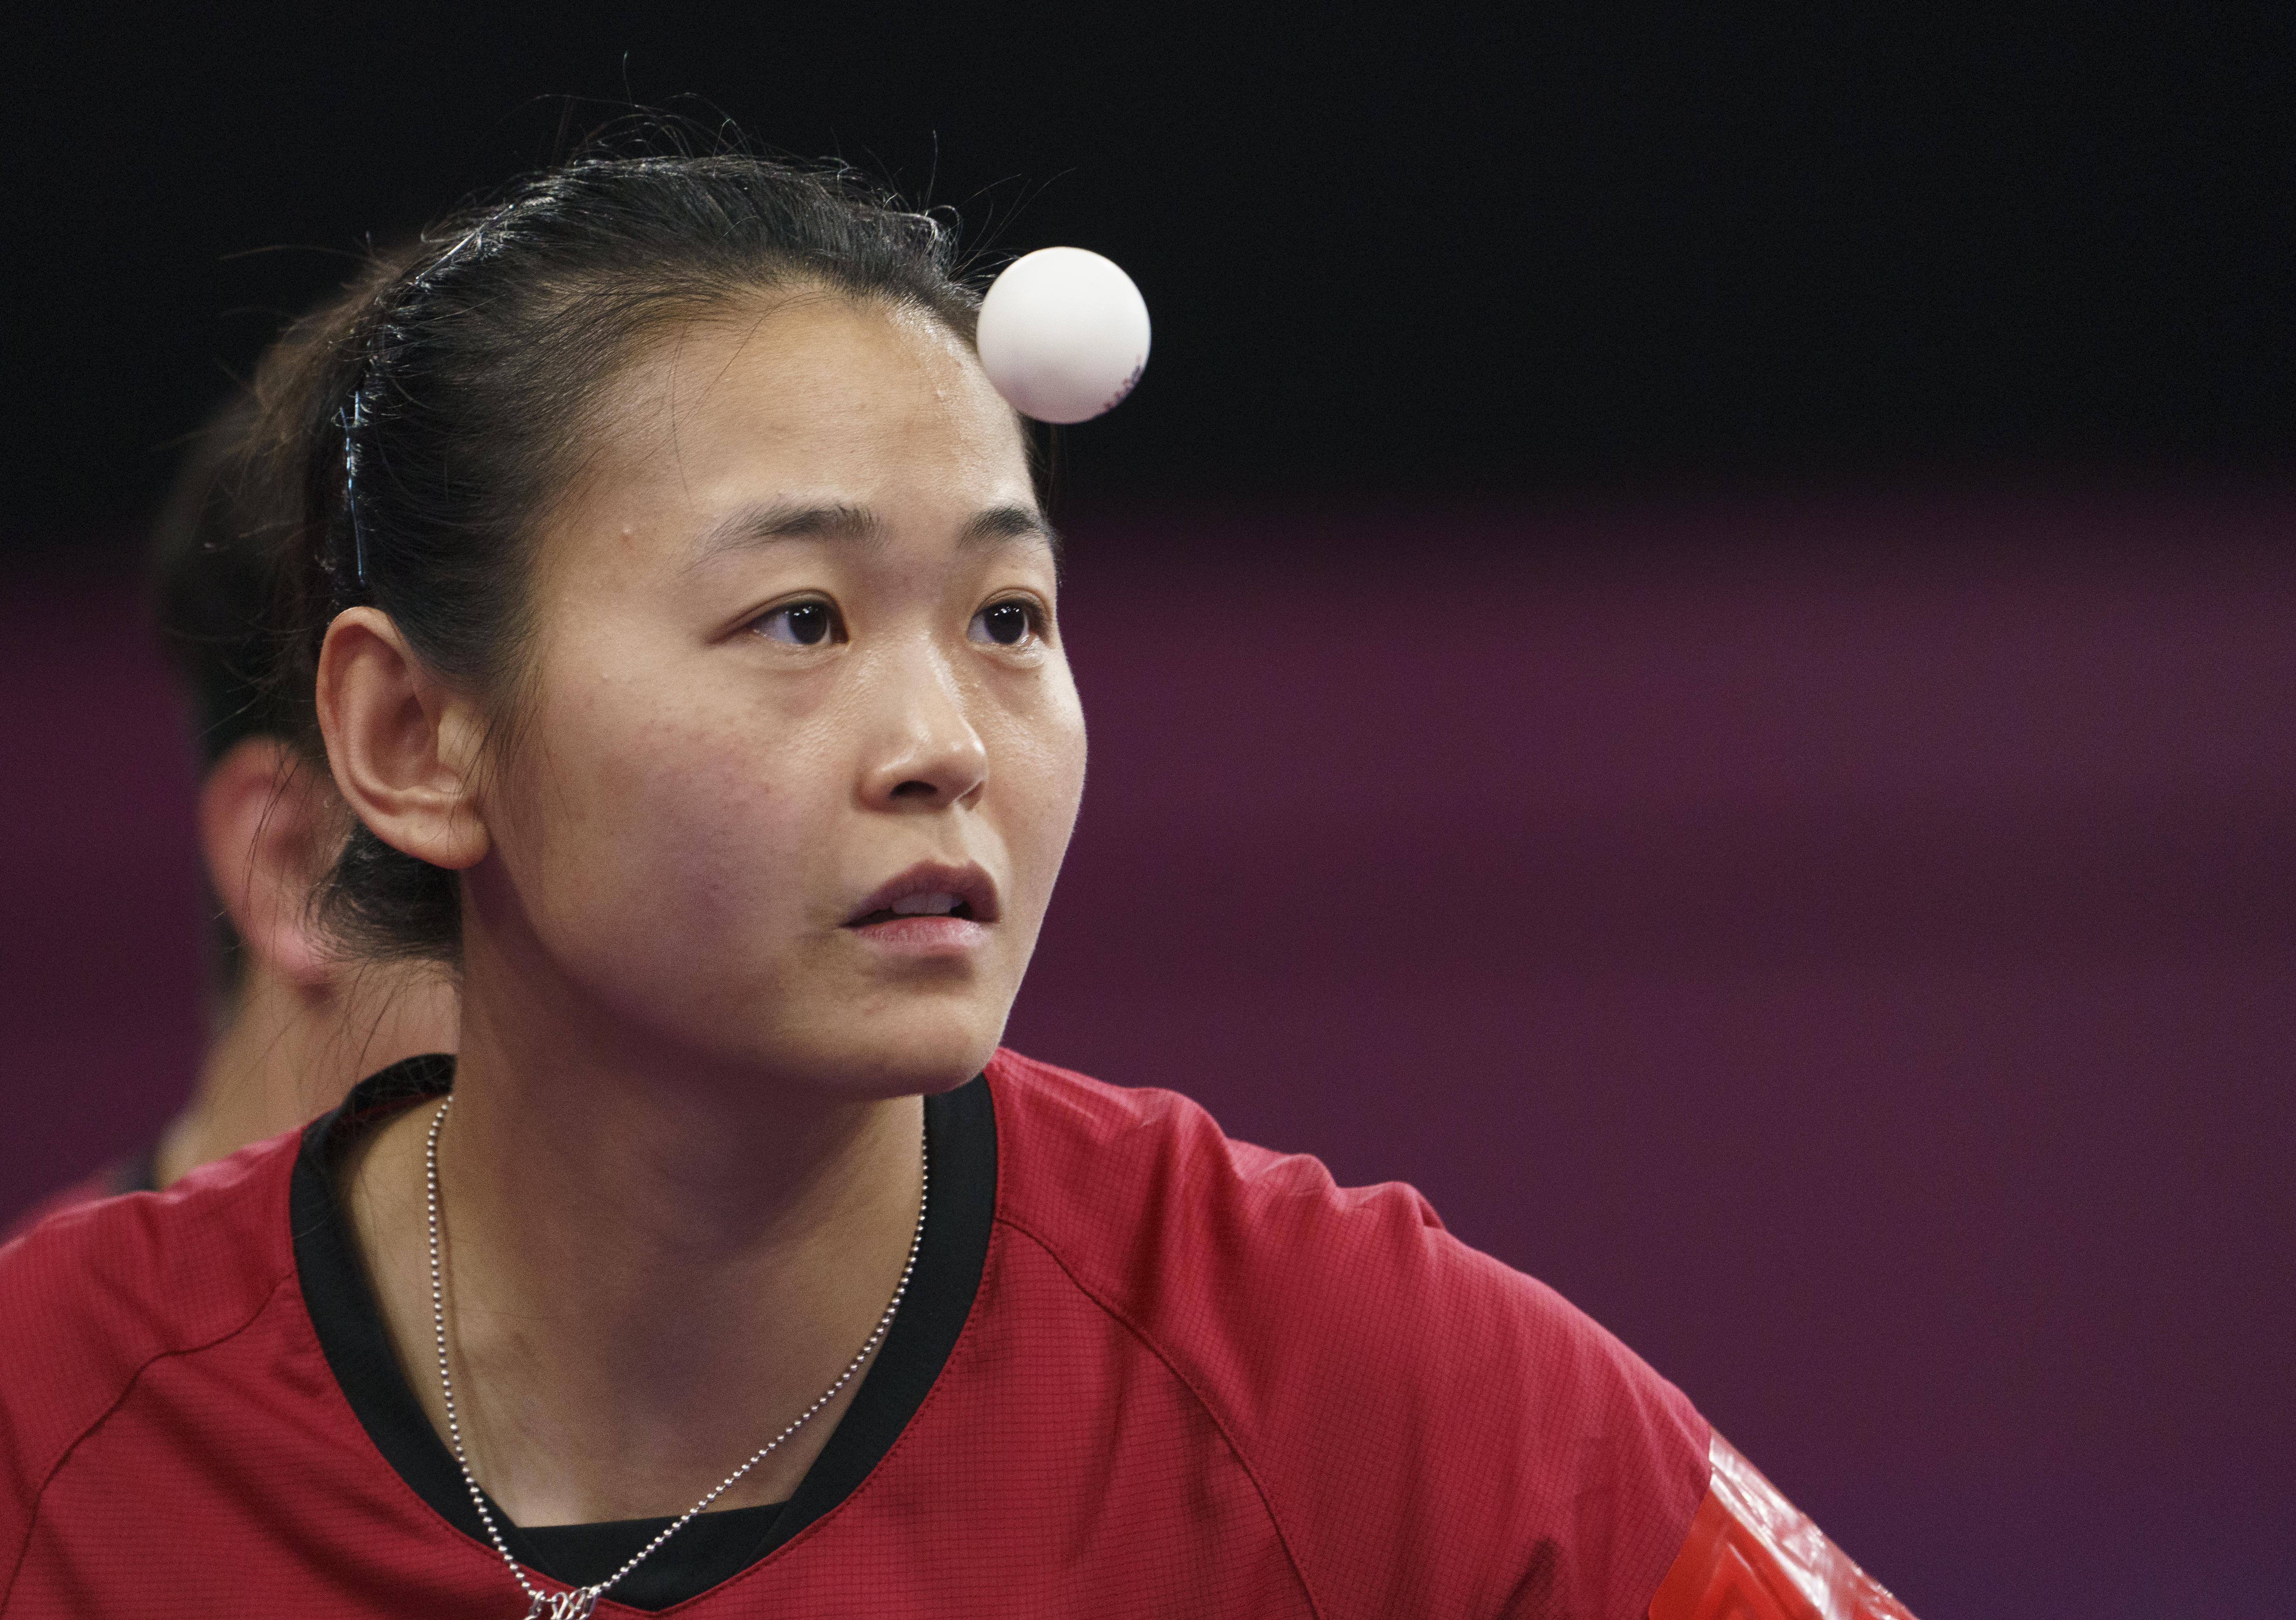 Table tennis ball floats in front of female player